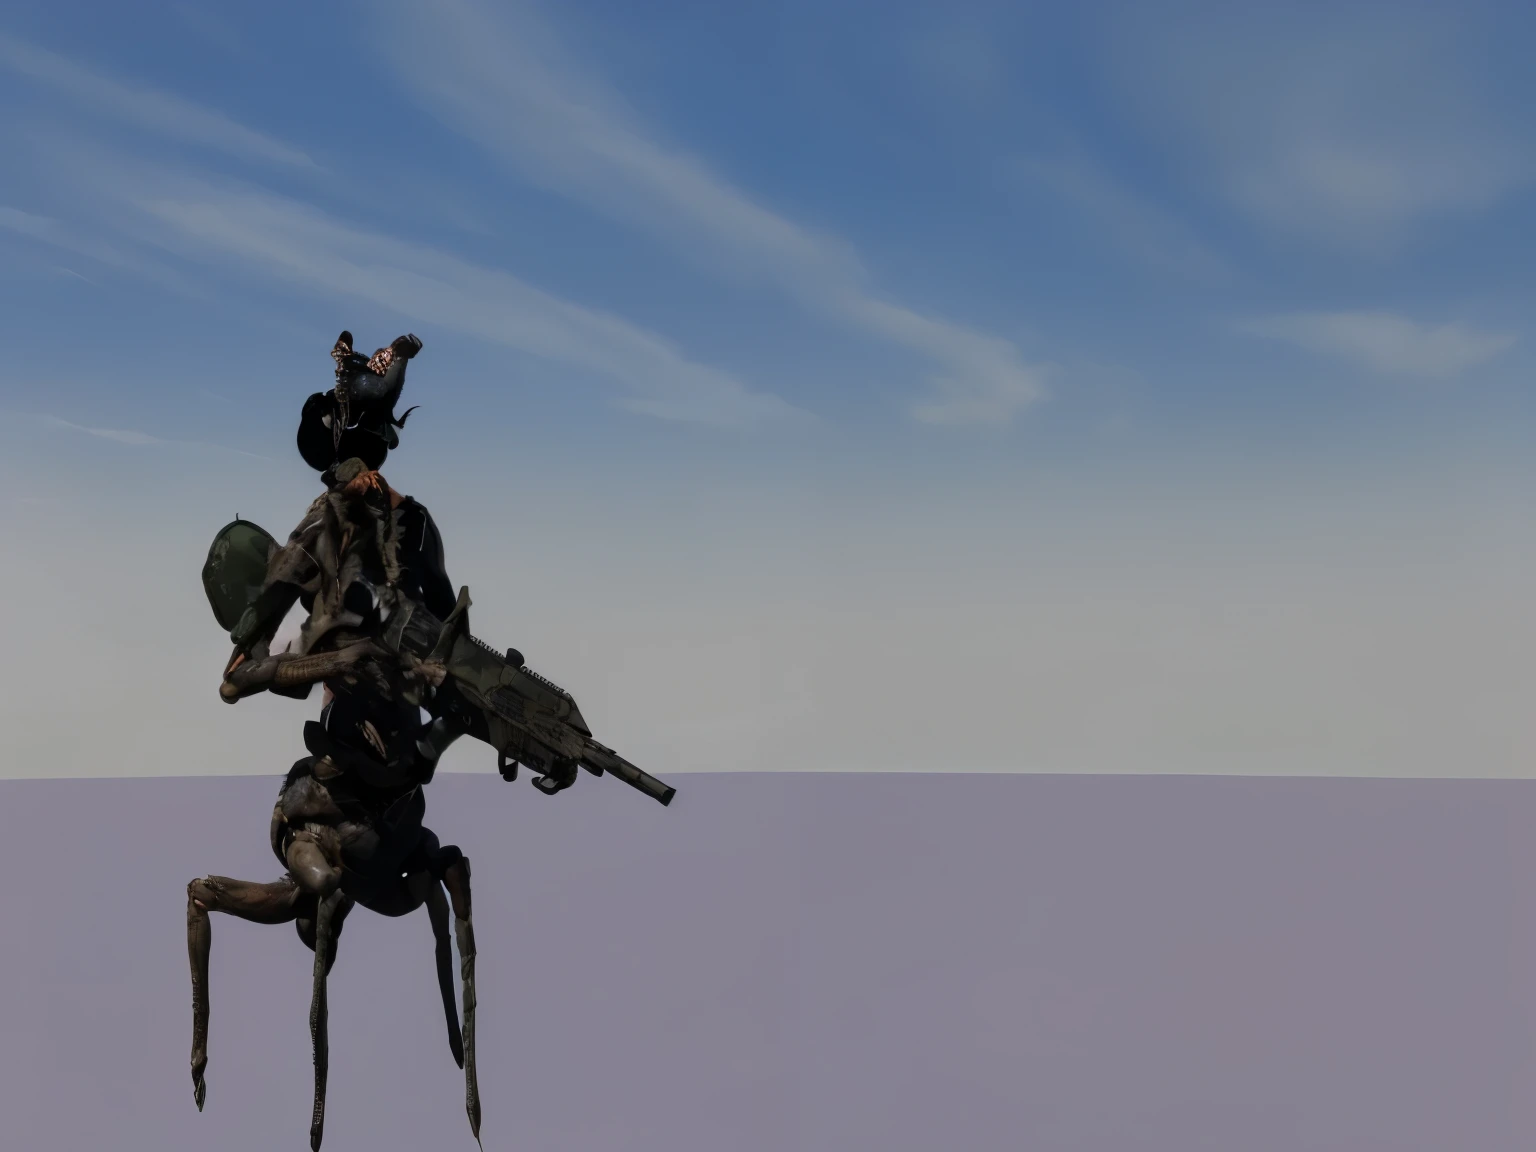 Alien bug with 4 legs 4 arms and 4 eyes holding a rifle standing in front of a blank background, photo realistic alien, hyper realistic alien centaur bug soldier, alien centaur bug in camouflage holding a rifle